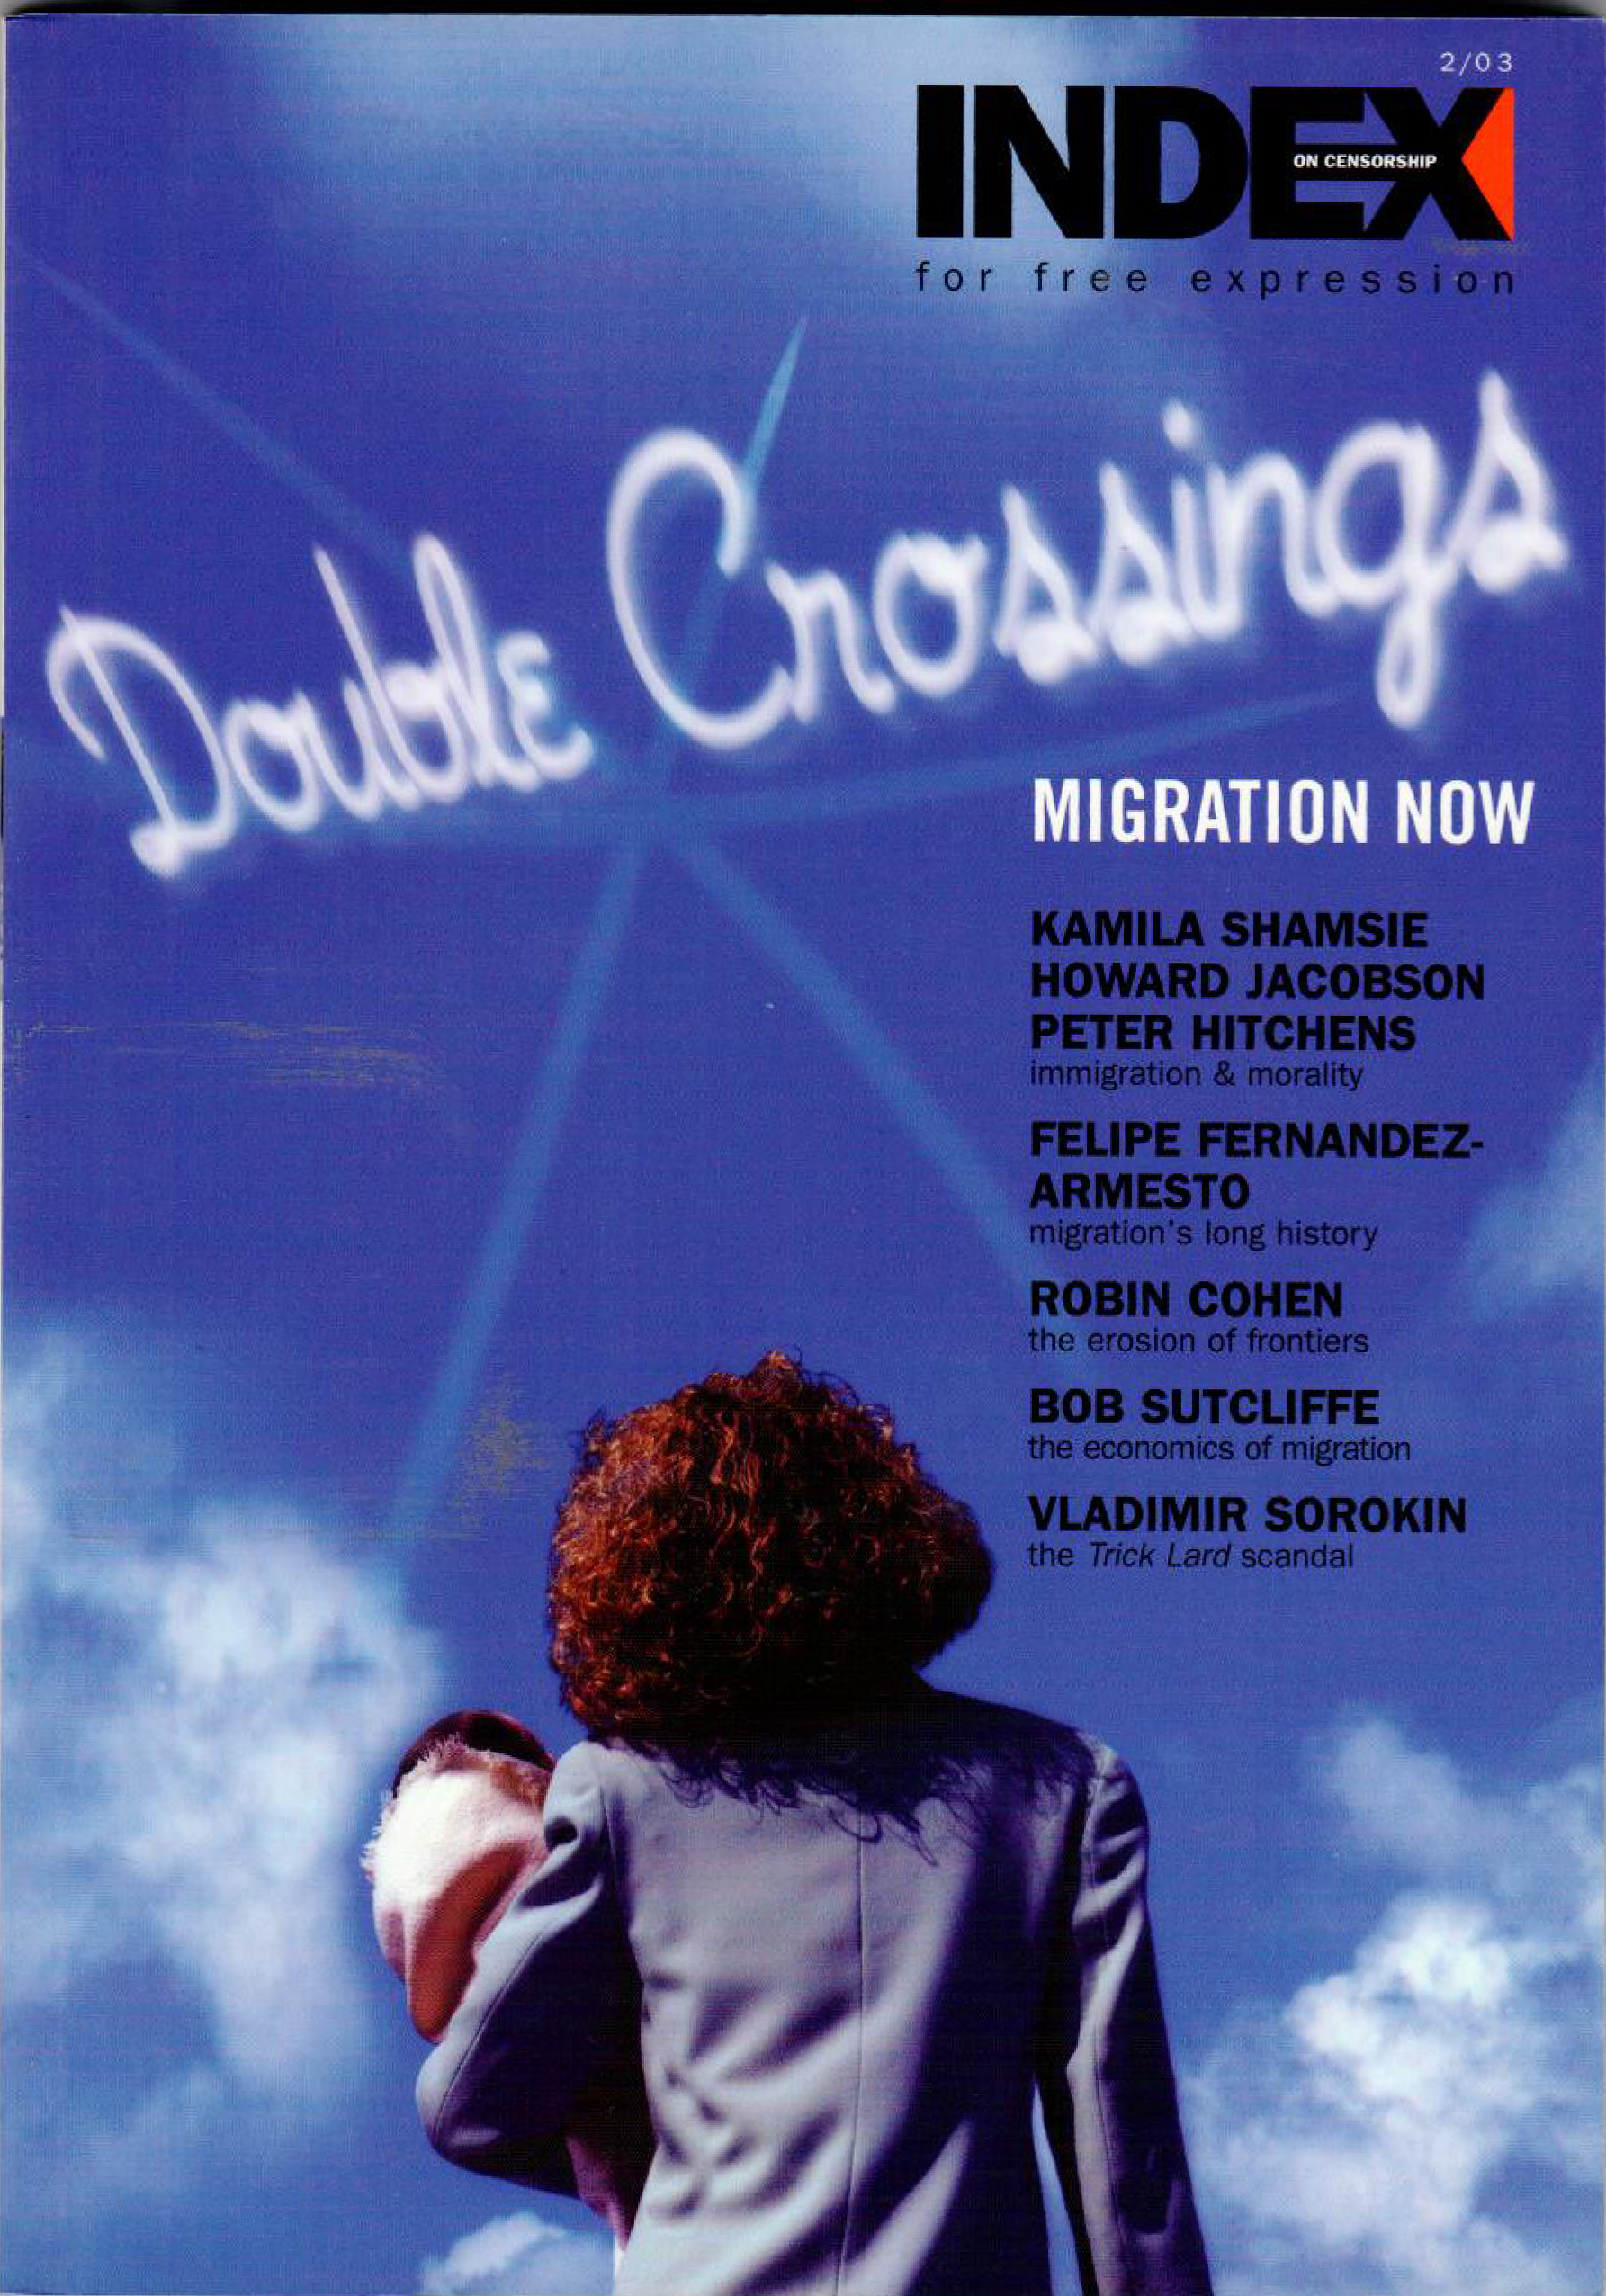 Double crossings, the summer 2003 issue of Index on Censorship magazine.